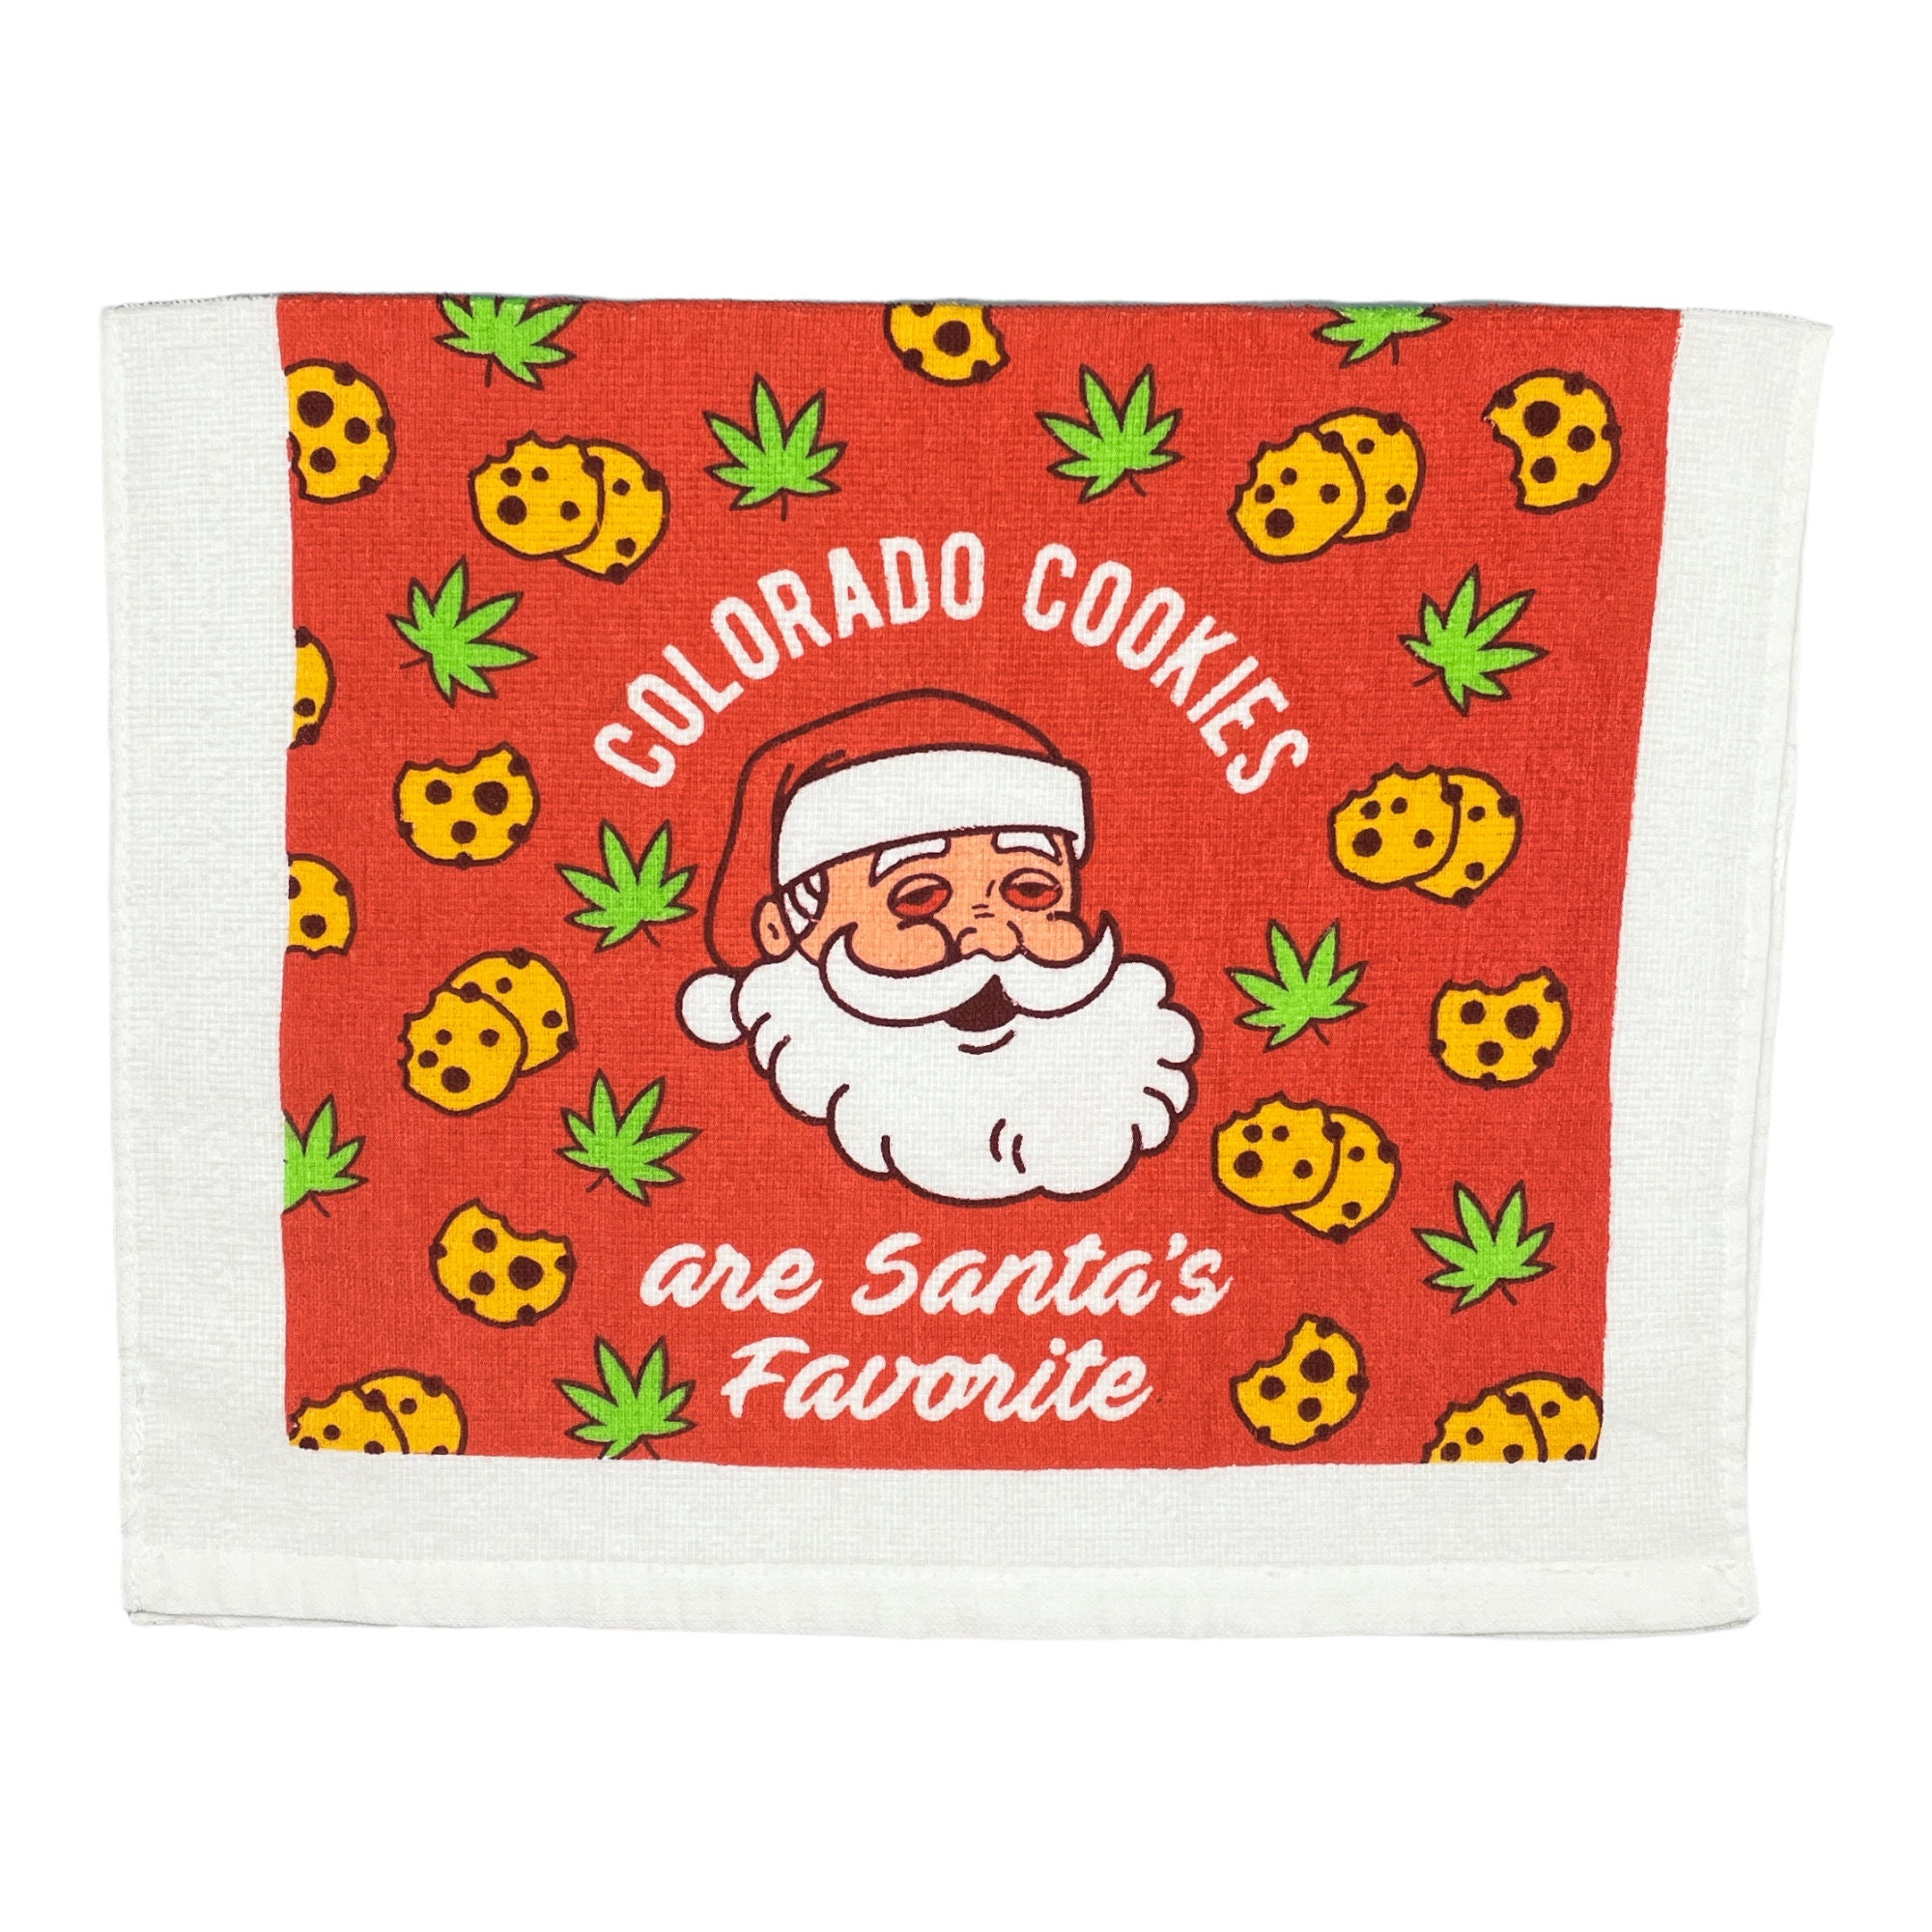 Colorado Cookies Are Santa's Favorite Oven Mitt Funny Weed Pot Edibles  Christmas Novelty Kitchen Glove